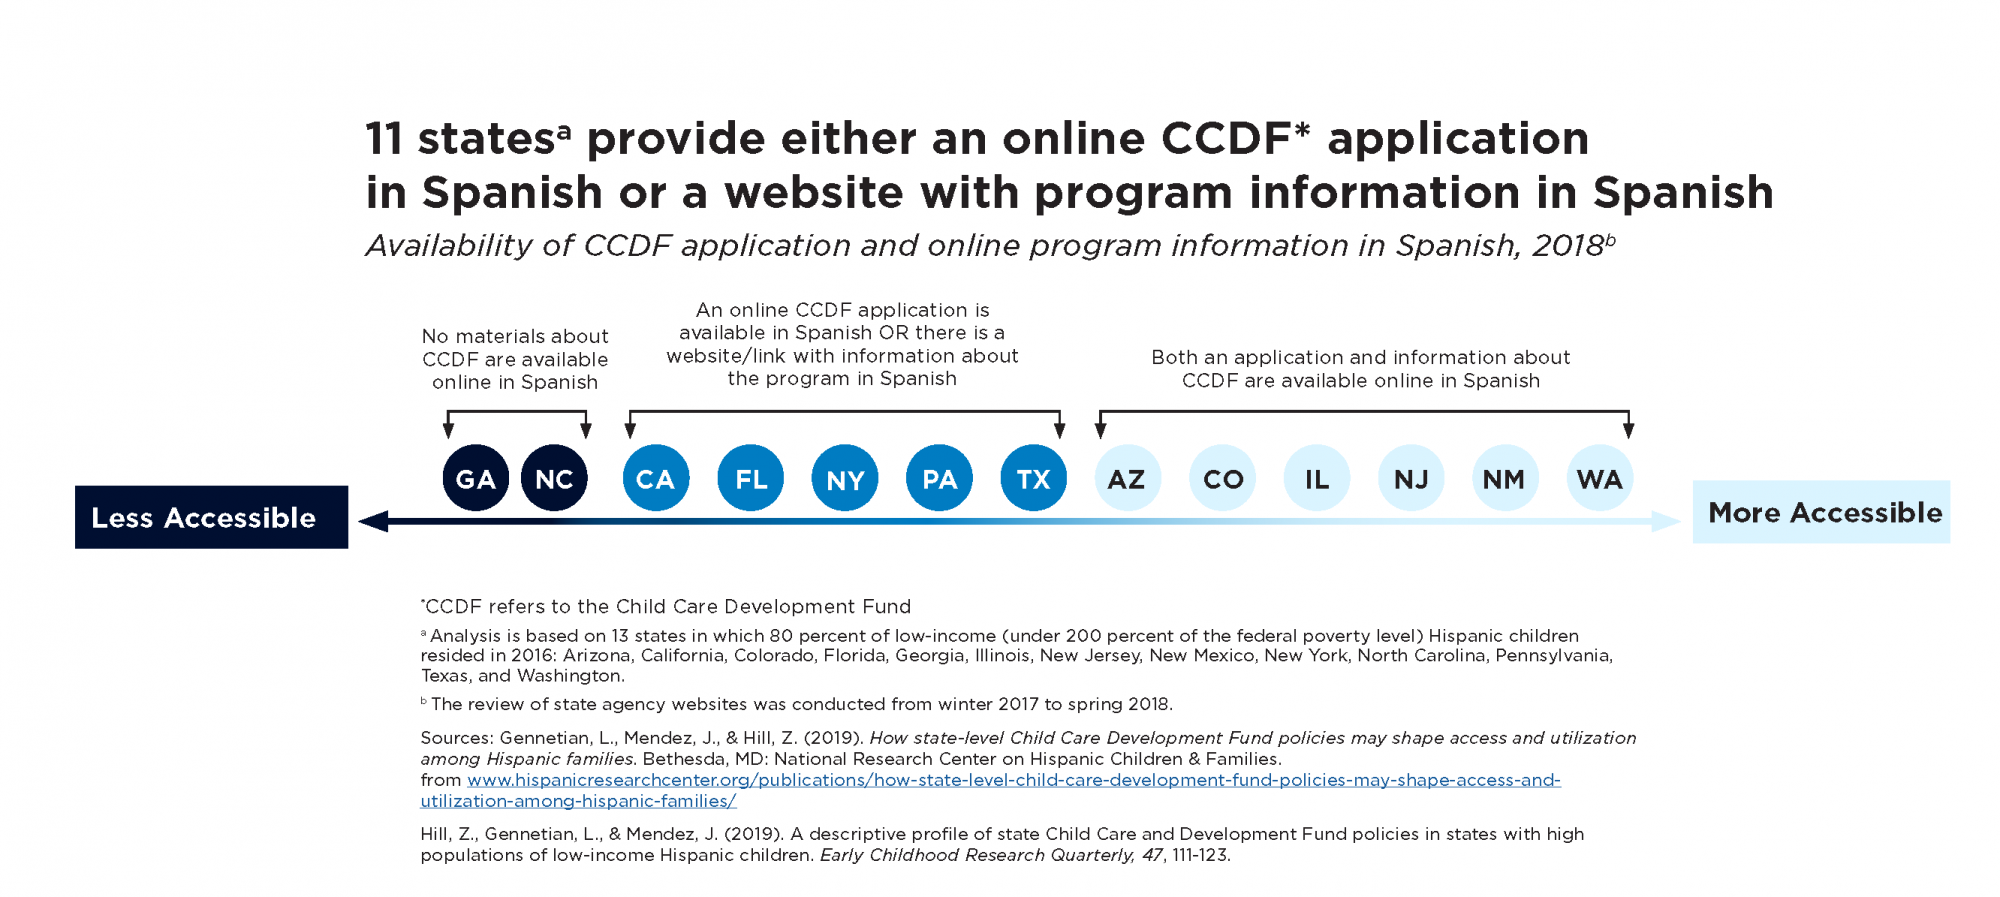 11 states provide either an online CCDF application in Spanish or a website with program information in Spanish